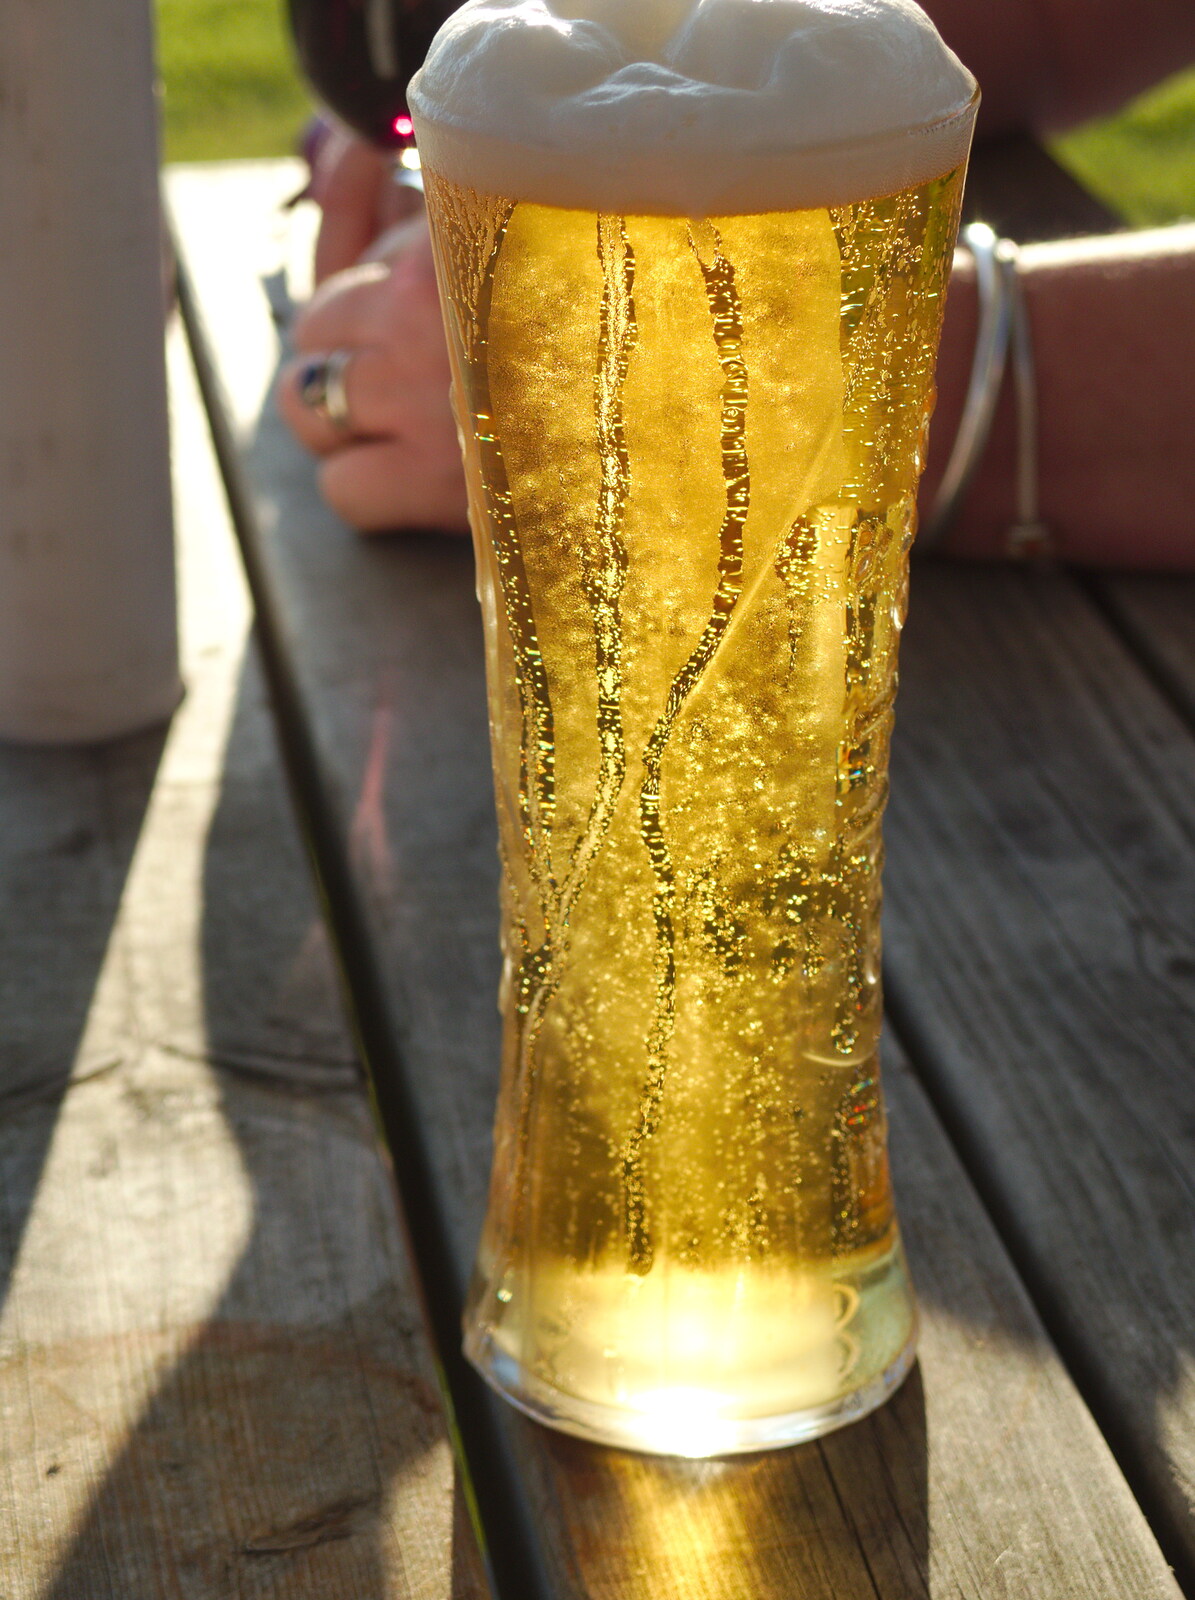 Rob's pint of foaming cold lager from The BBs at Diss Rugby Club, Bellrope Lane, Roydon, Norfolk - 7th June 2014